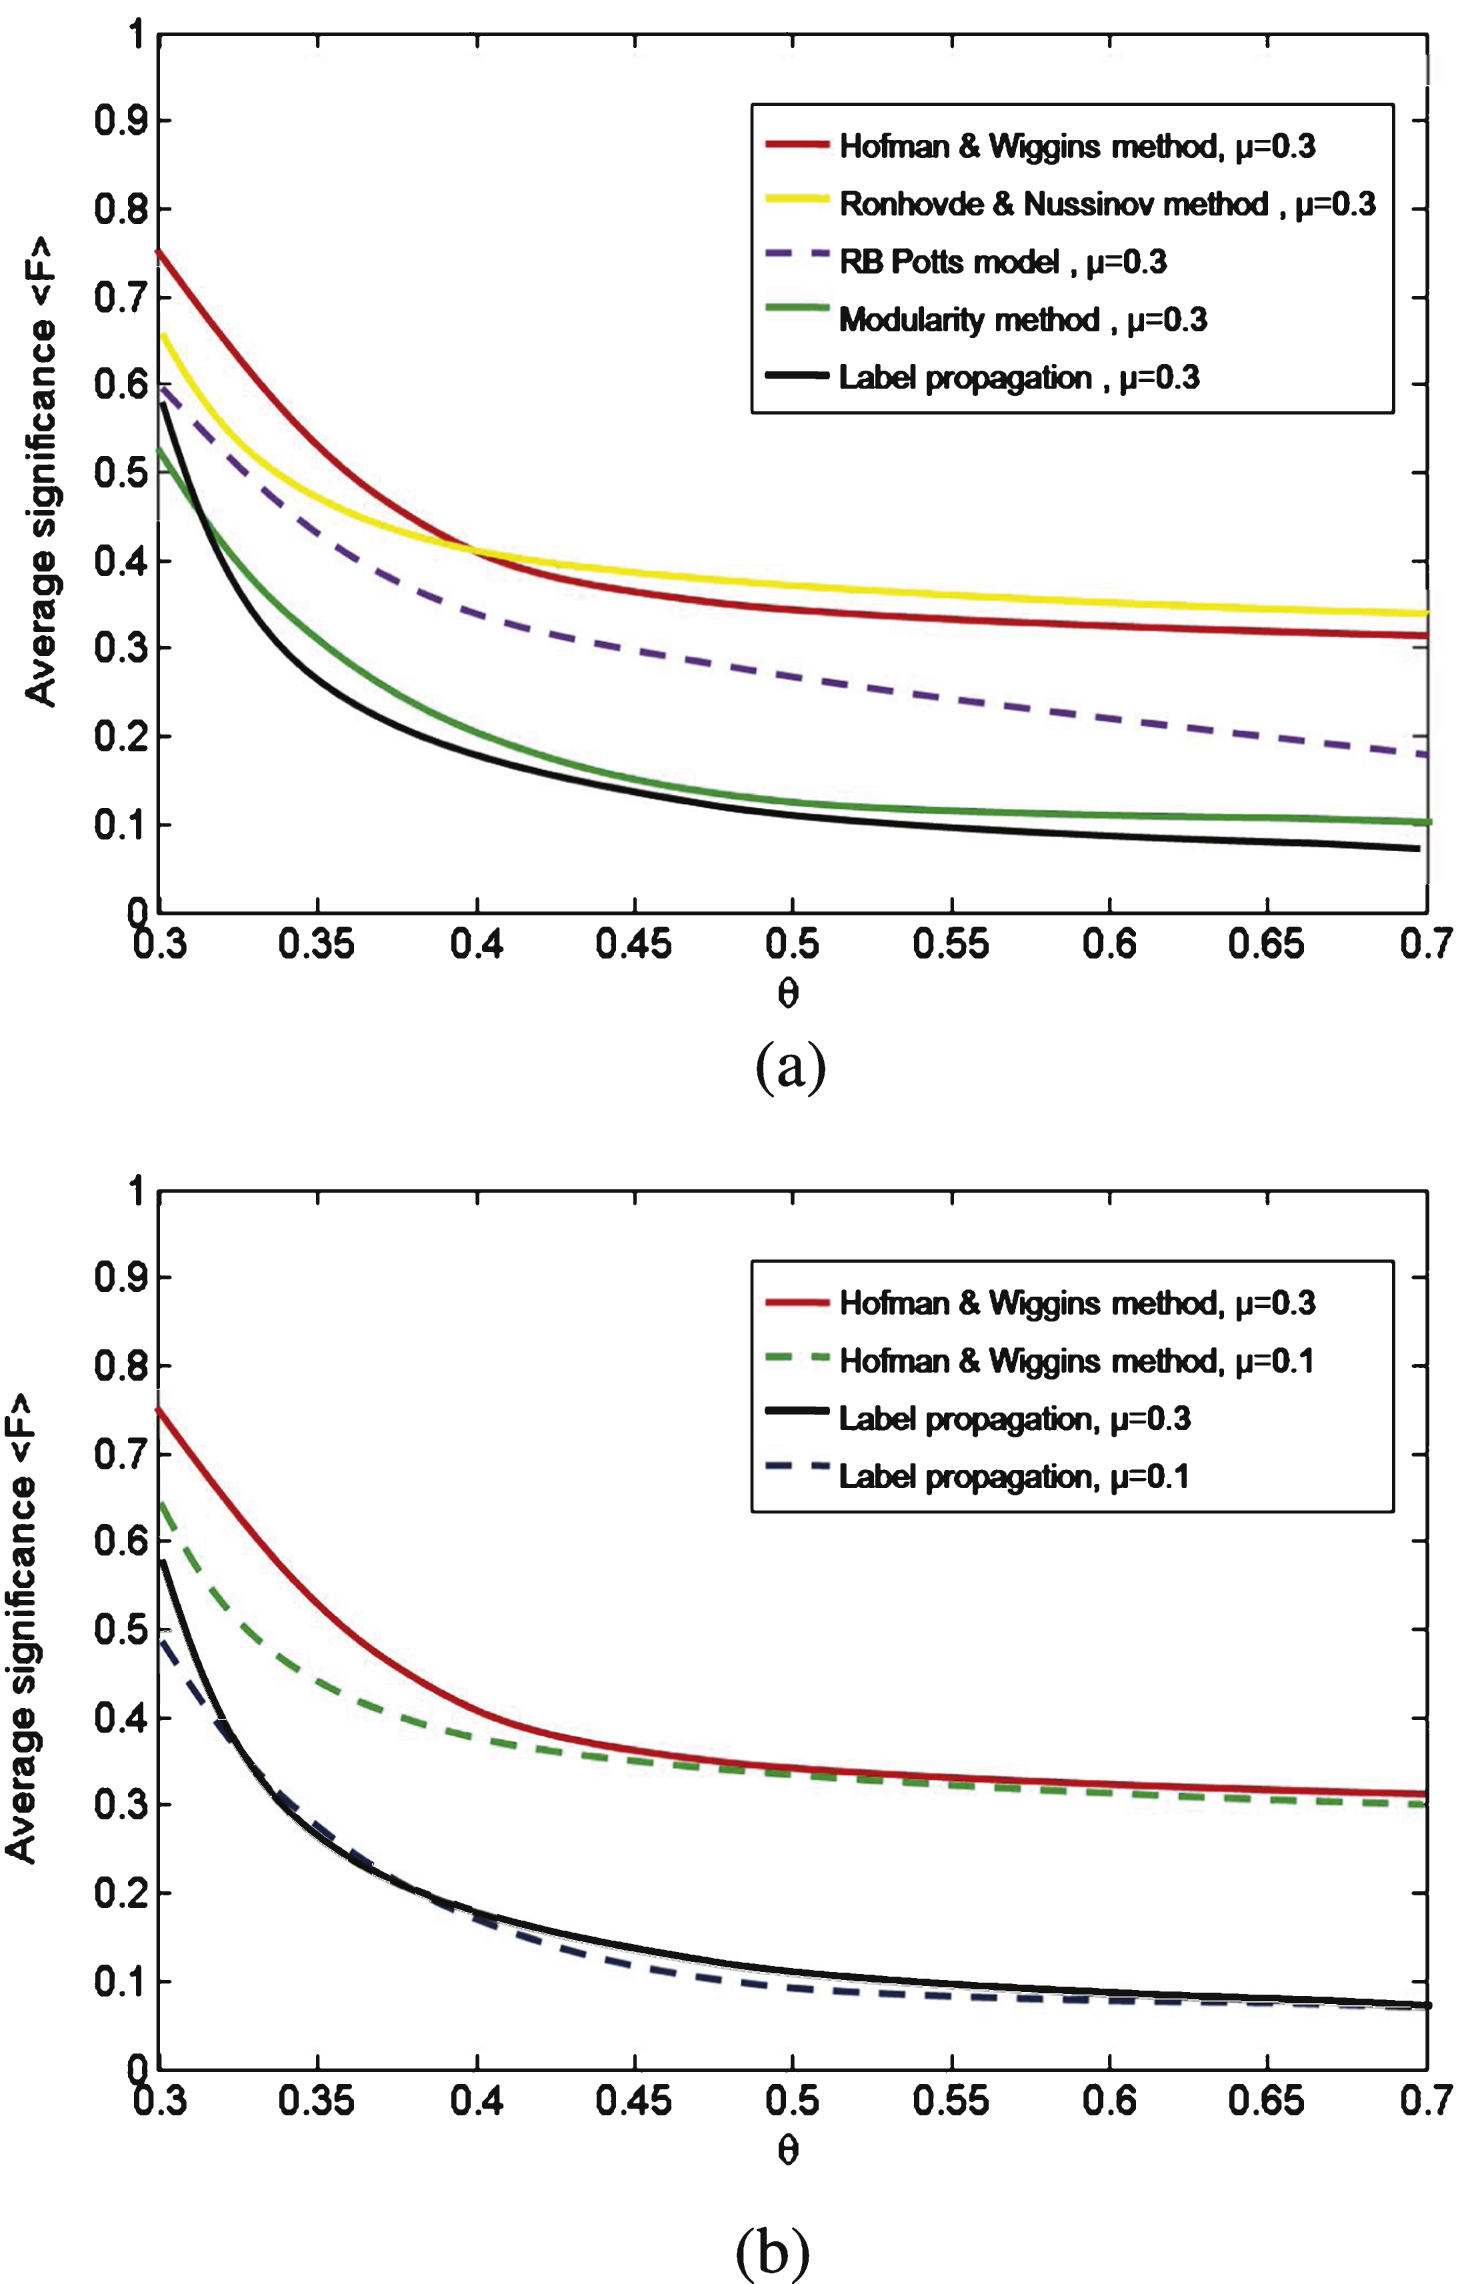 The performance of significance 〈F〉 on LFR benchmark network and each point in curves is obtained by testing 100 times. (a) In this 
network, the average degree k = 20, maximum degree is 50 and P (k) ∝ k

γ
. Maximum and minimum 
community sizes are 50 and 20 respectively. For all five algorithms, the 〈F〉 index decreases with 
the increasing of mix parameter θ. When θ ≥ 0.5 on average (no significant community), 〈F〉 is near 0.3 which is
similar with GN network. (b) The value of 〈F〉 corresponding to μ = 0.3 will be larger than μ = 0.1 for the Hofman & Wiggins method and Label propagation method.